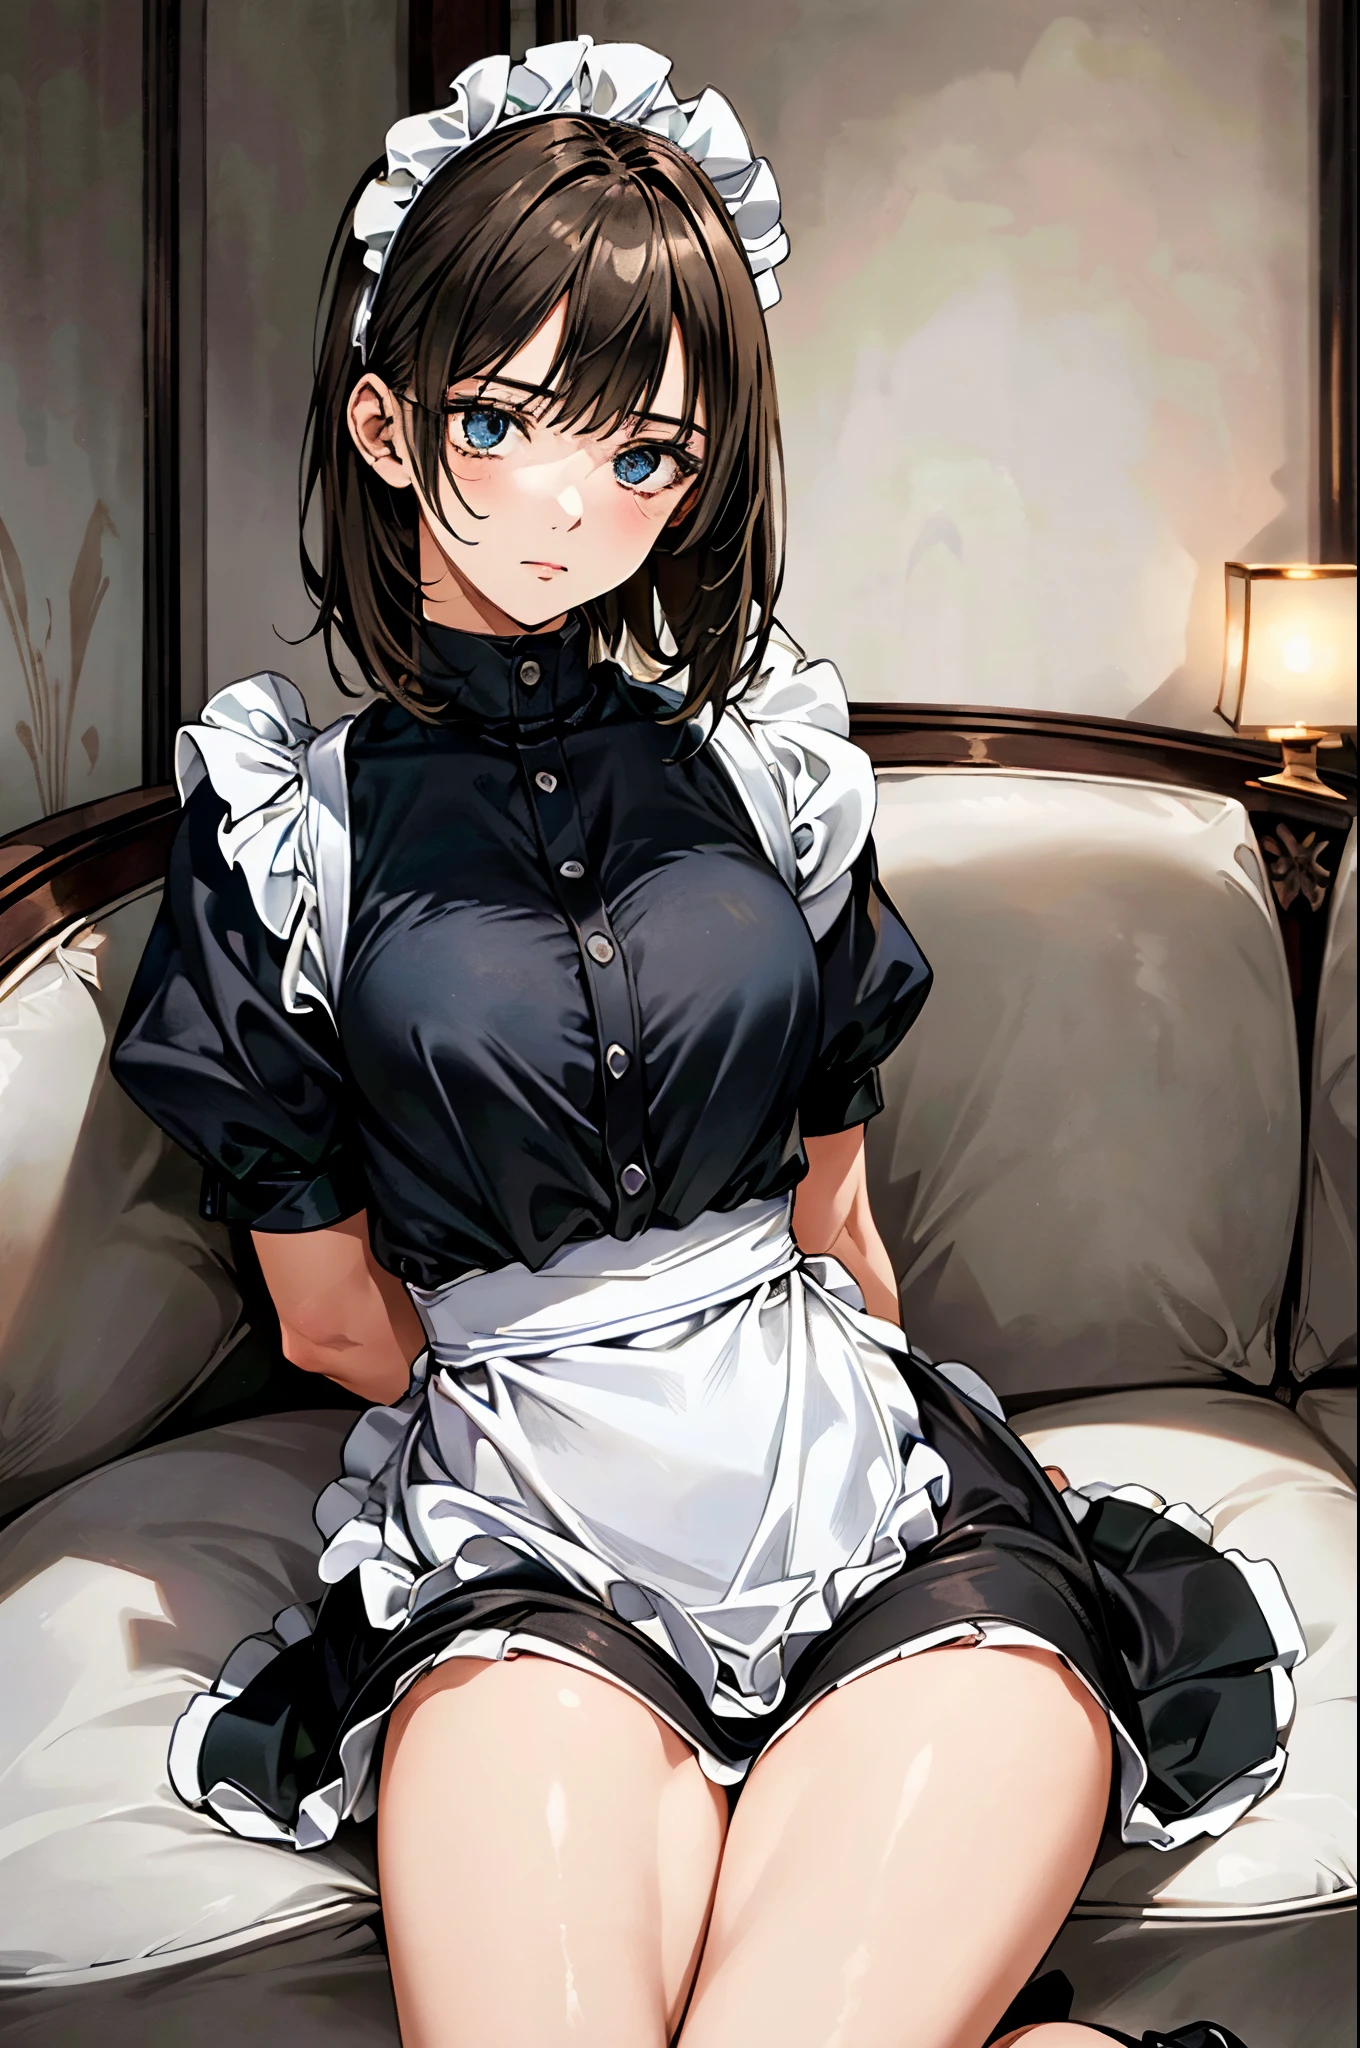 (masterpiece:1.2, top-quality, ultra high res, ultra detailed), (realistic, photorealistic:1.4), beautiful illustration, (natural side lighting, movie lighting), depth of fields, colorful, nsfw, 
looking at viewer, 1 girl, maid, 20 years old, expressive eyes,perfect eyes, perfect face, (perfect anatomy), cute and symmetrical face, baby face, 
(short hair:1.2, straight hair:1.2, brown hair), bangs, blue eyes, long eye lasher, (medium breasts), perfect balance, white skin, shiny skin, slender, 
beautiful hair, beautiful face, beautiful detailed eyes, beautiful clavicle, beautiful body, beautiful chest, beautiful thigh, beautiful legs, 
(detailed cloth texture, (closed clothes), black shirt, puffy sleeves, long sleeves, black long skirt, maid headdress, white glove), 
(beautiful scenery), evening, (living room minimalist), sitting sofa, hand between legs, (look down on with disdain, innocent big eyes:1.0, closed mouth), 